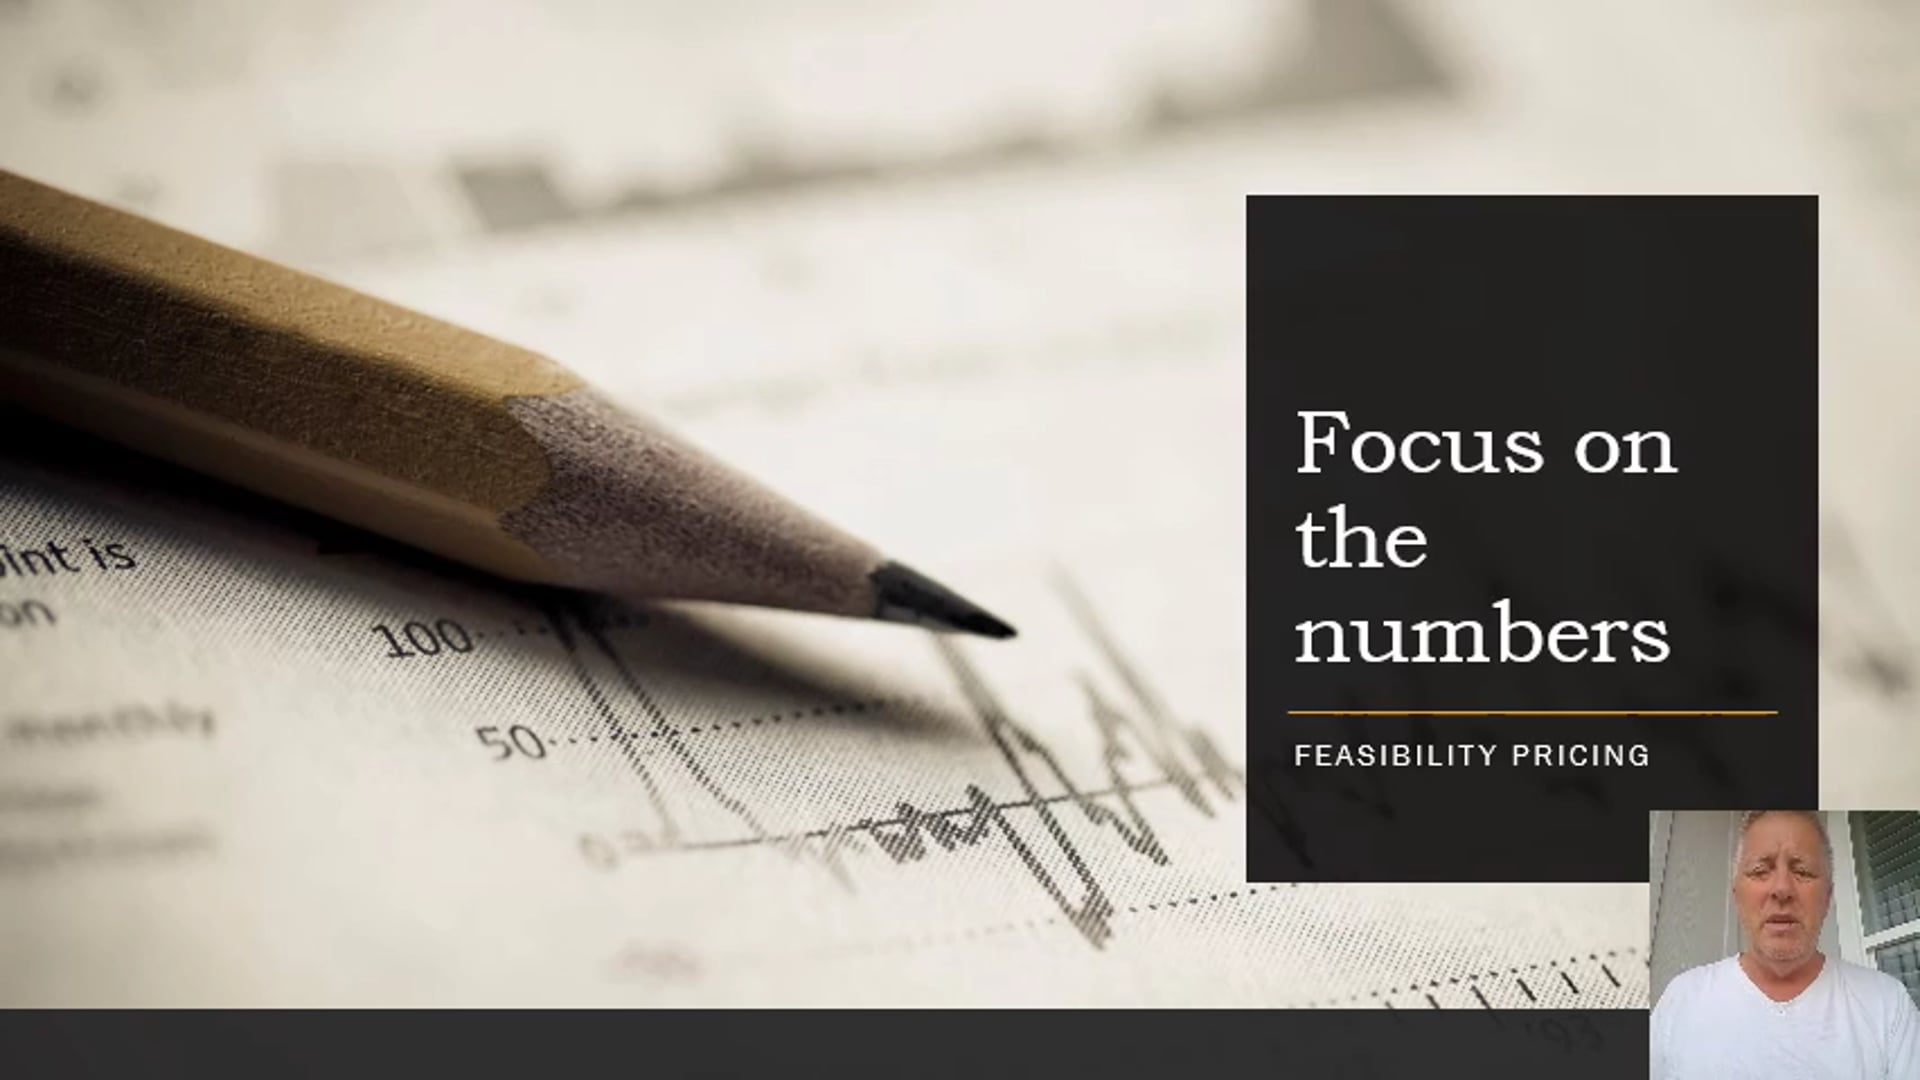 Focus on the numbers: feasibility